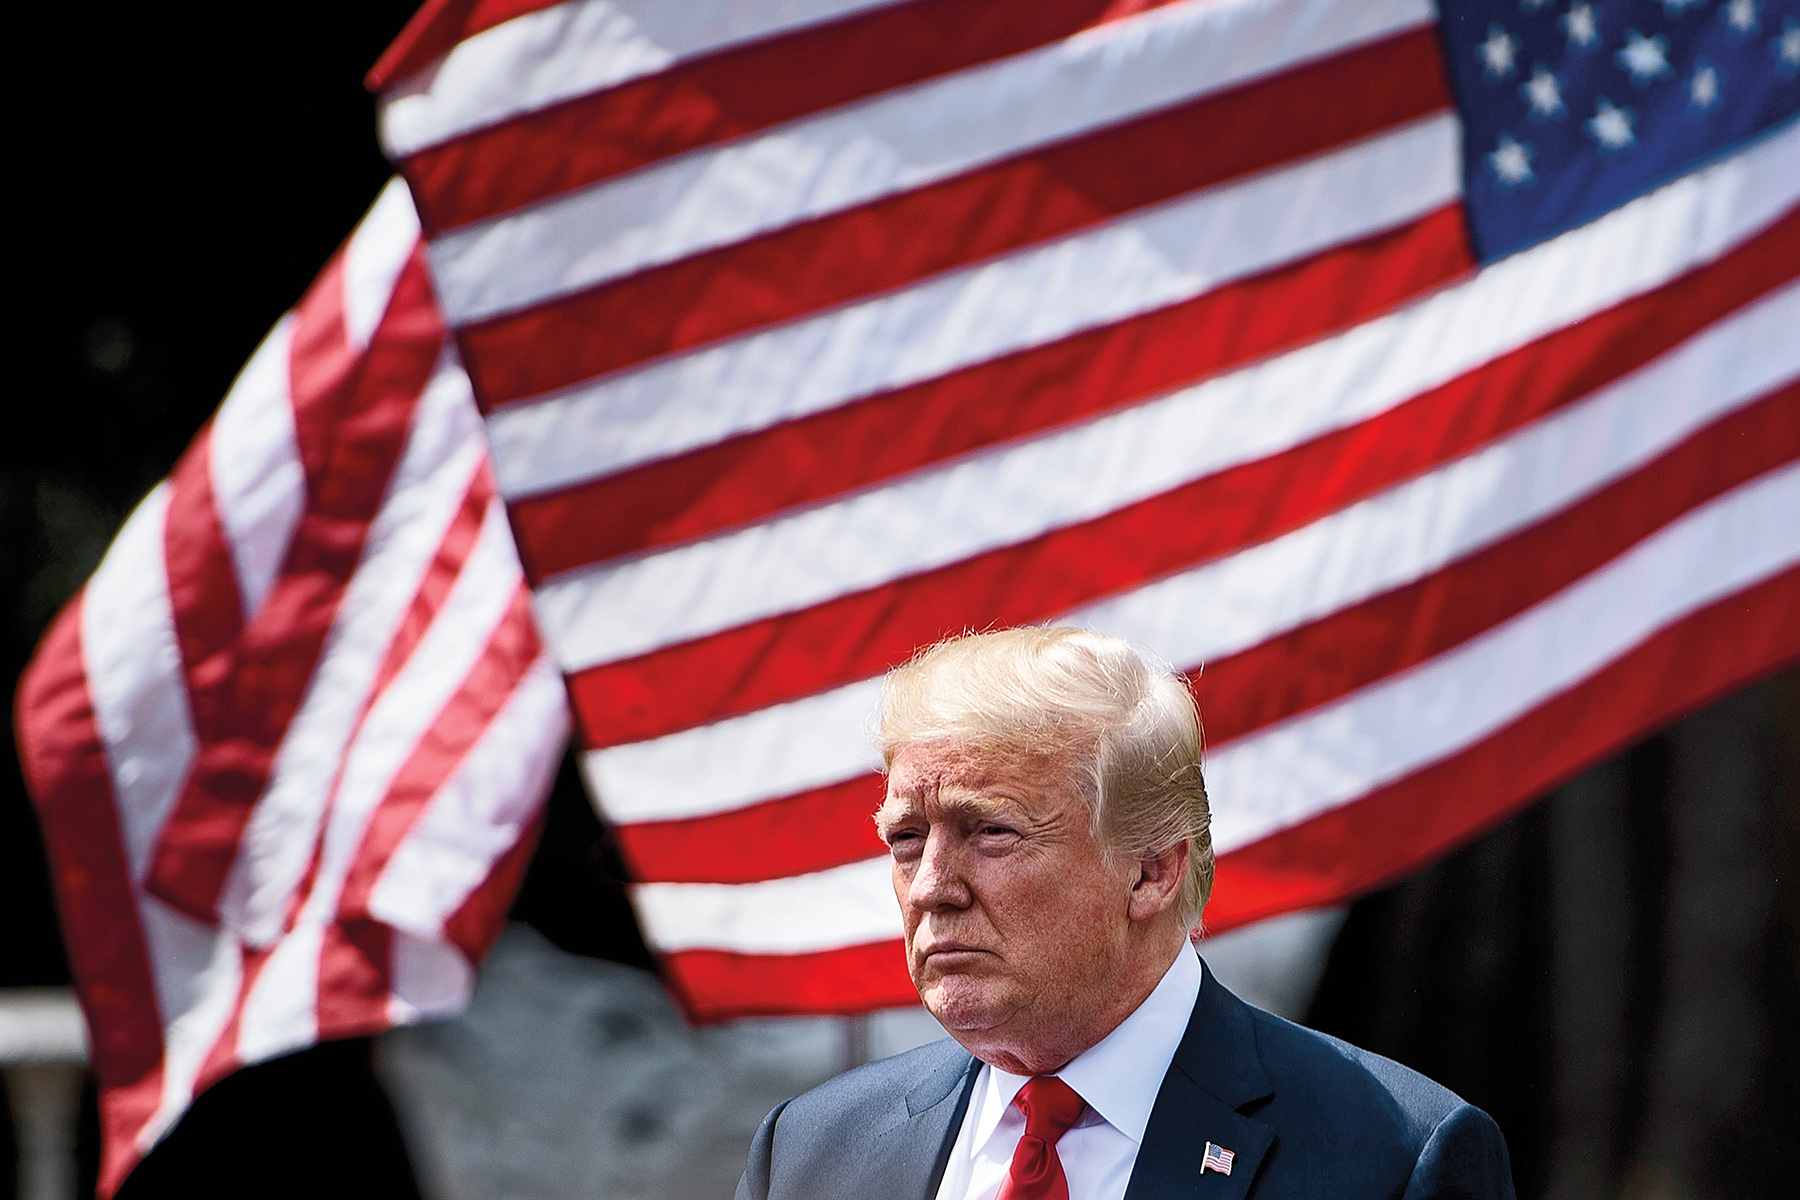 U.S. President Donald Trump at the White House on June 5, 2018. (Brendan Smialowski/AFP/Getty Images)